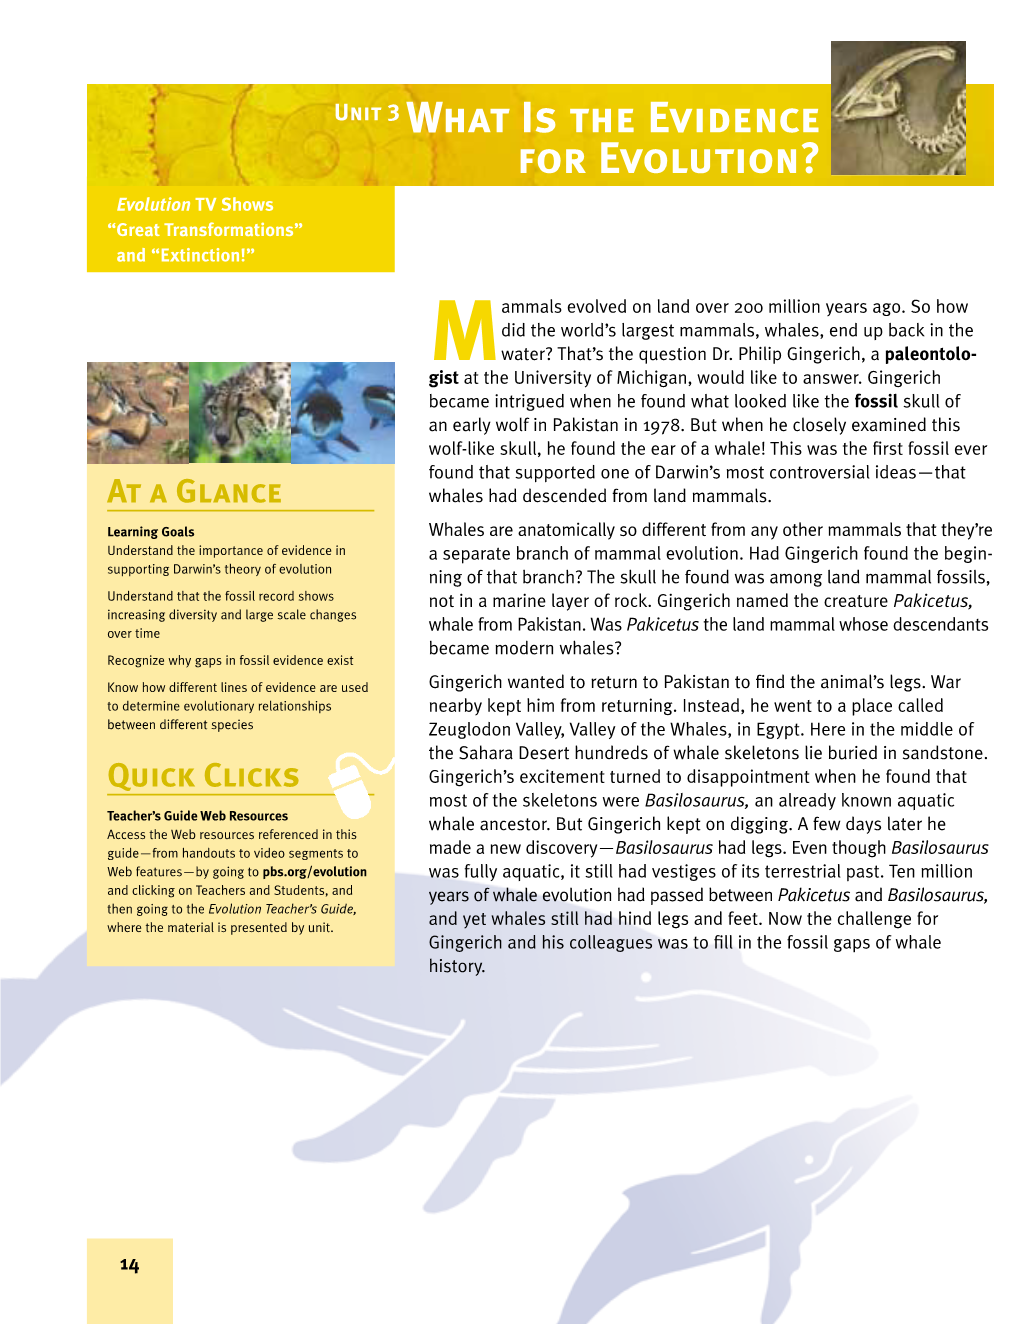 Unit 3: What Is the Evidence for Evolution?